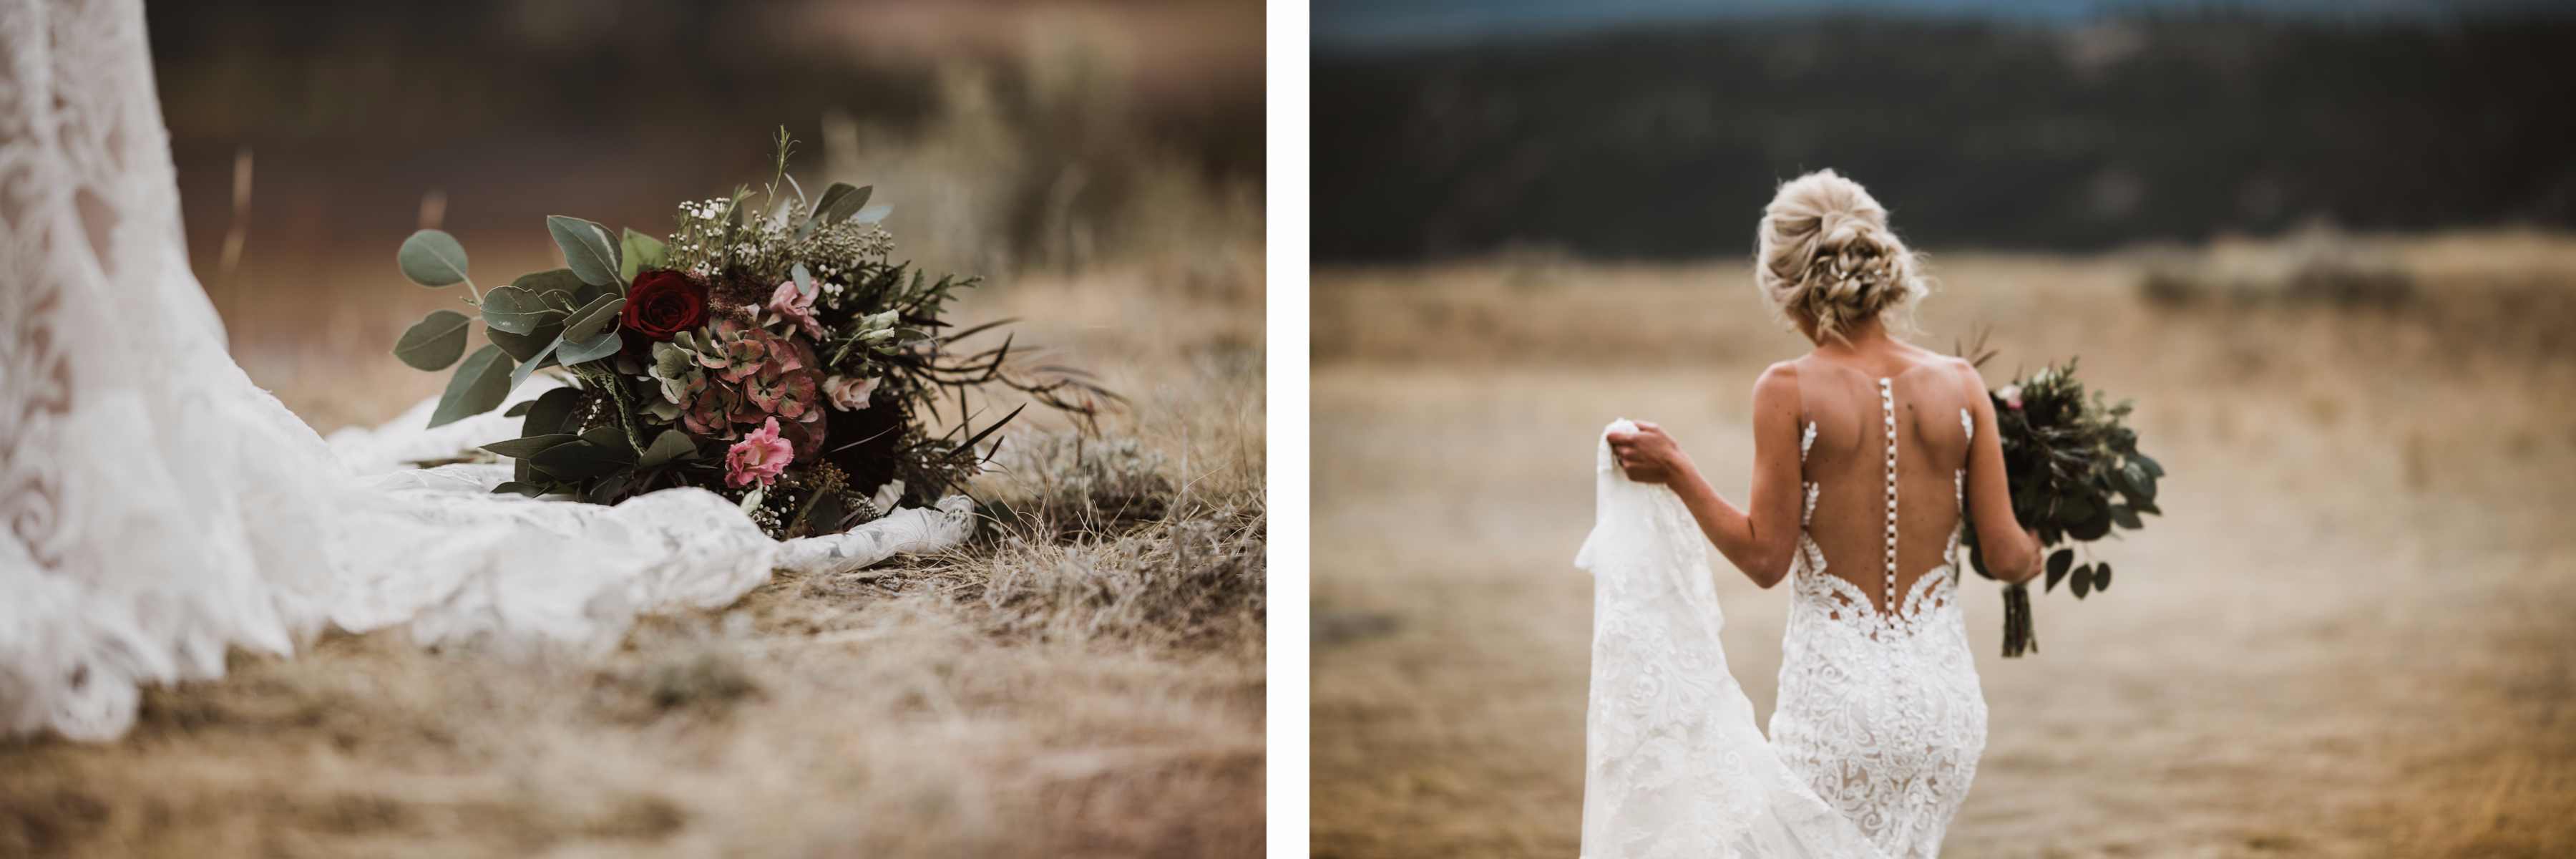 Calgary wedding photographer in Invermere for adventurous mountain destination elopement at Eagle Ranch Golf Resort, British Columbia - Image 25